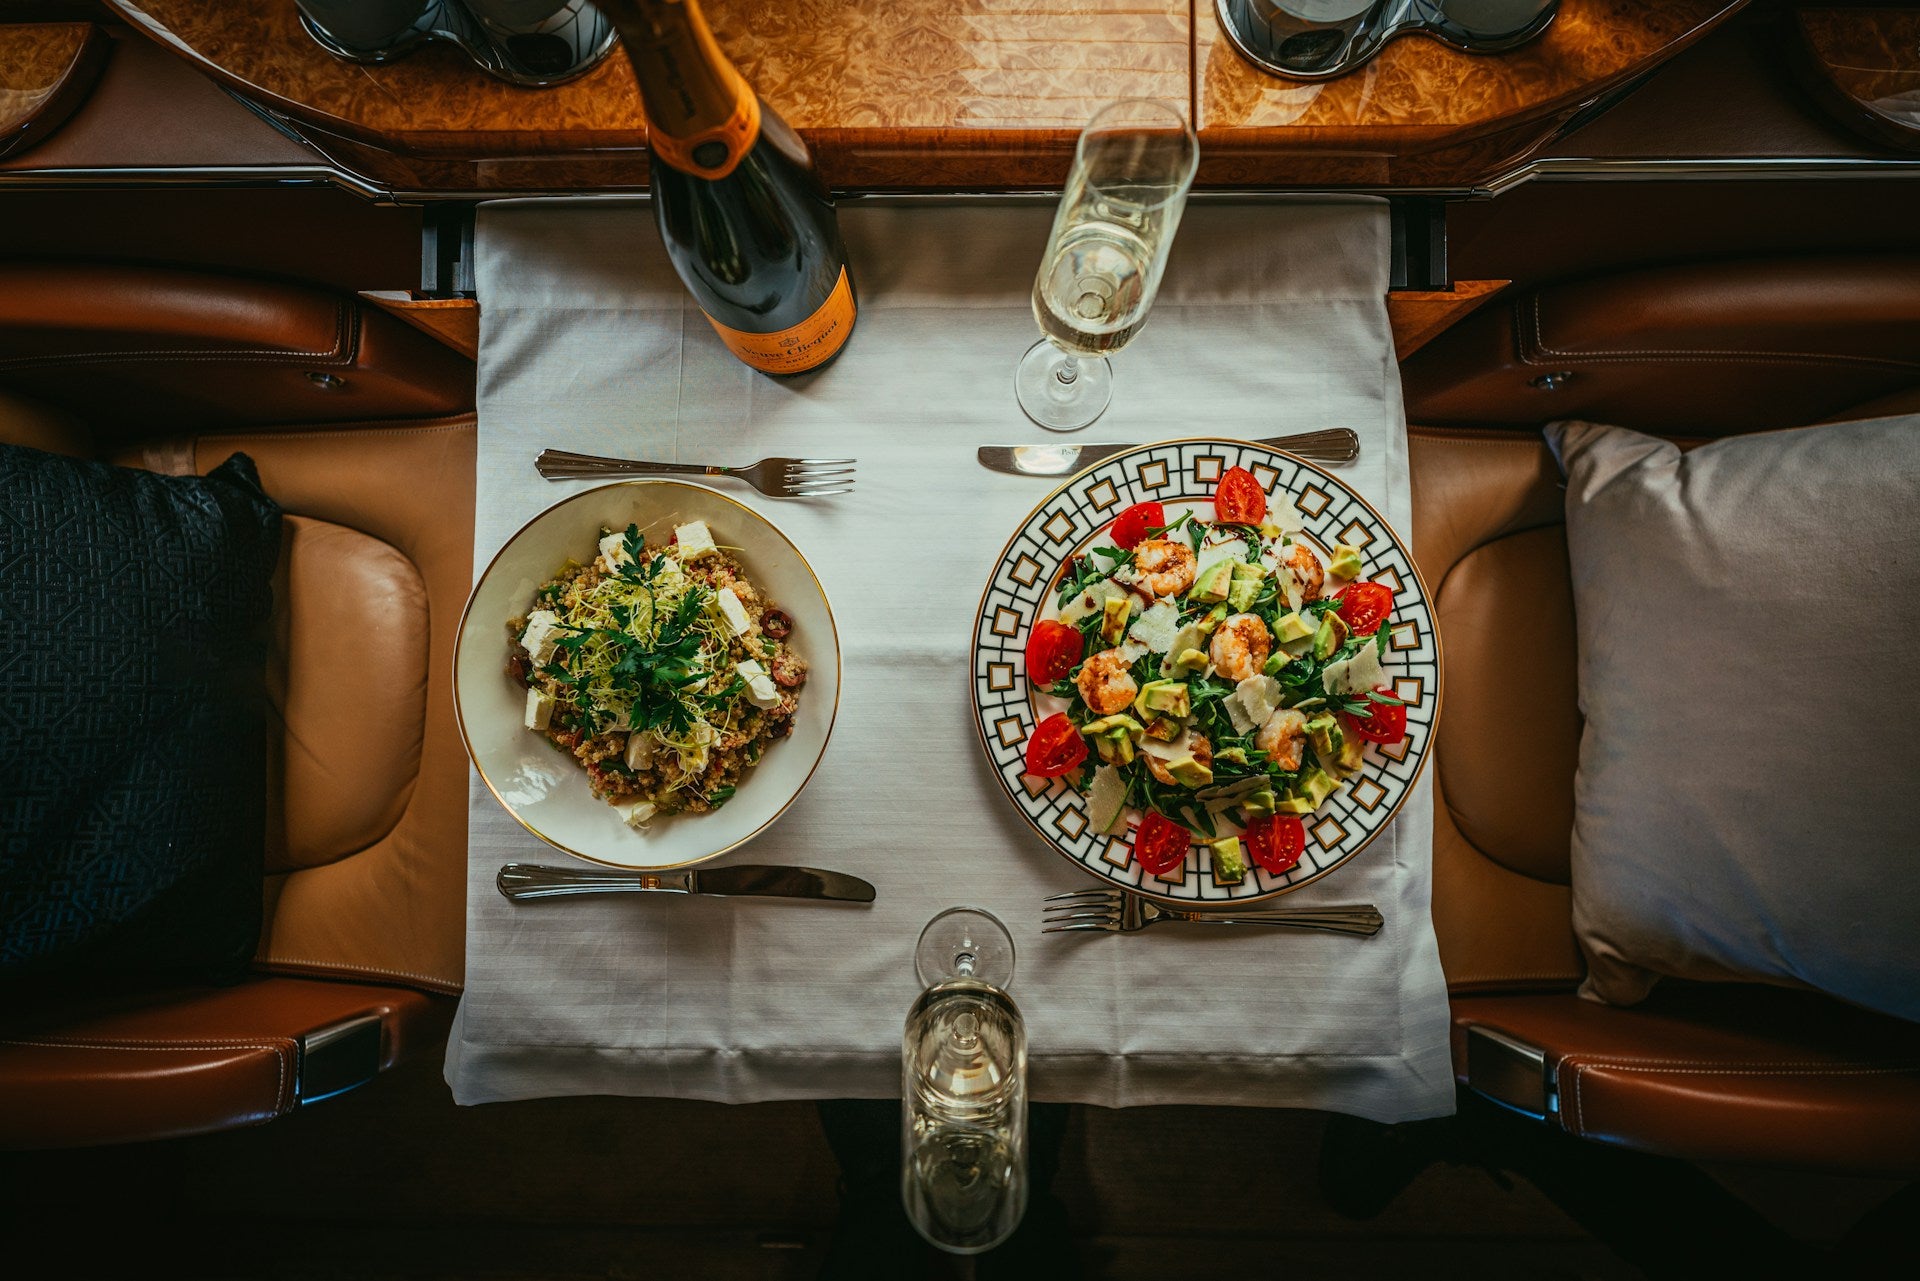 https://unsplash.com/photos/a-table-with-plates-of-food-and-glasses-on-it-W1hRt9KiFXY